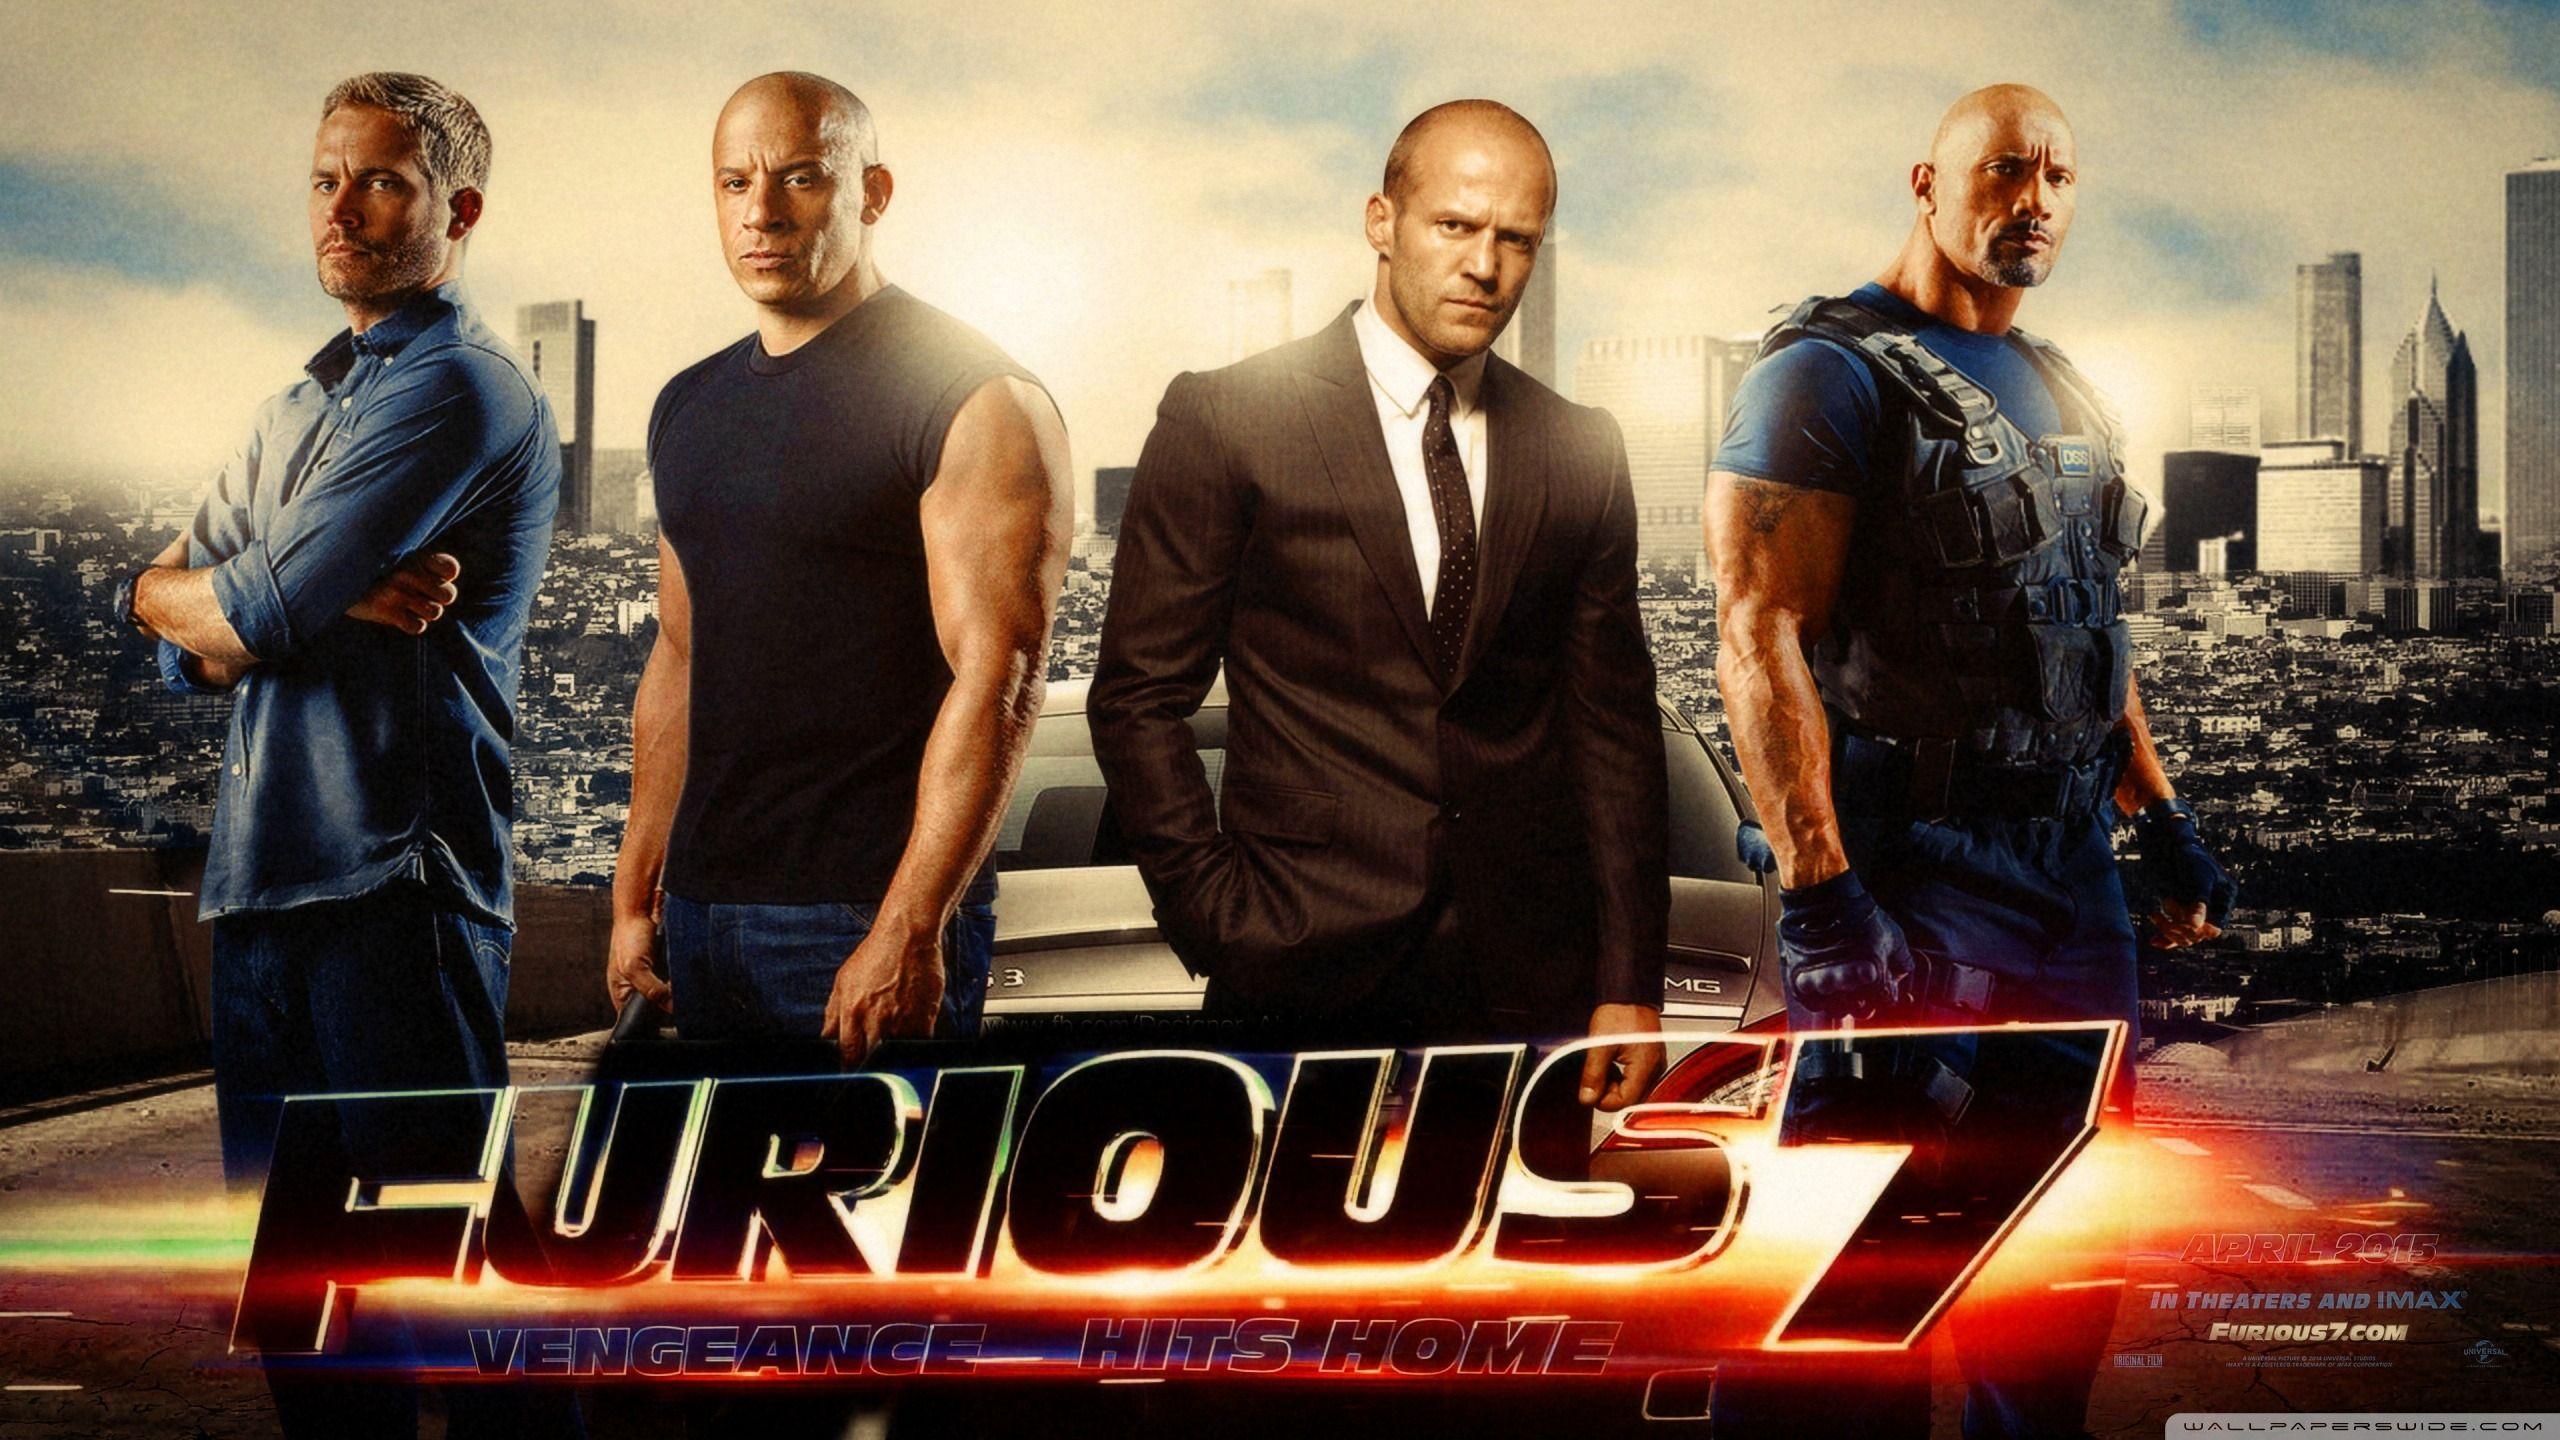 Fast and furious 7 wallpaper